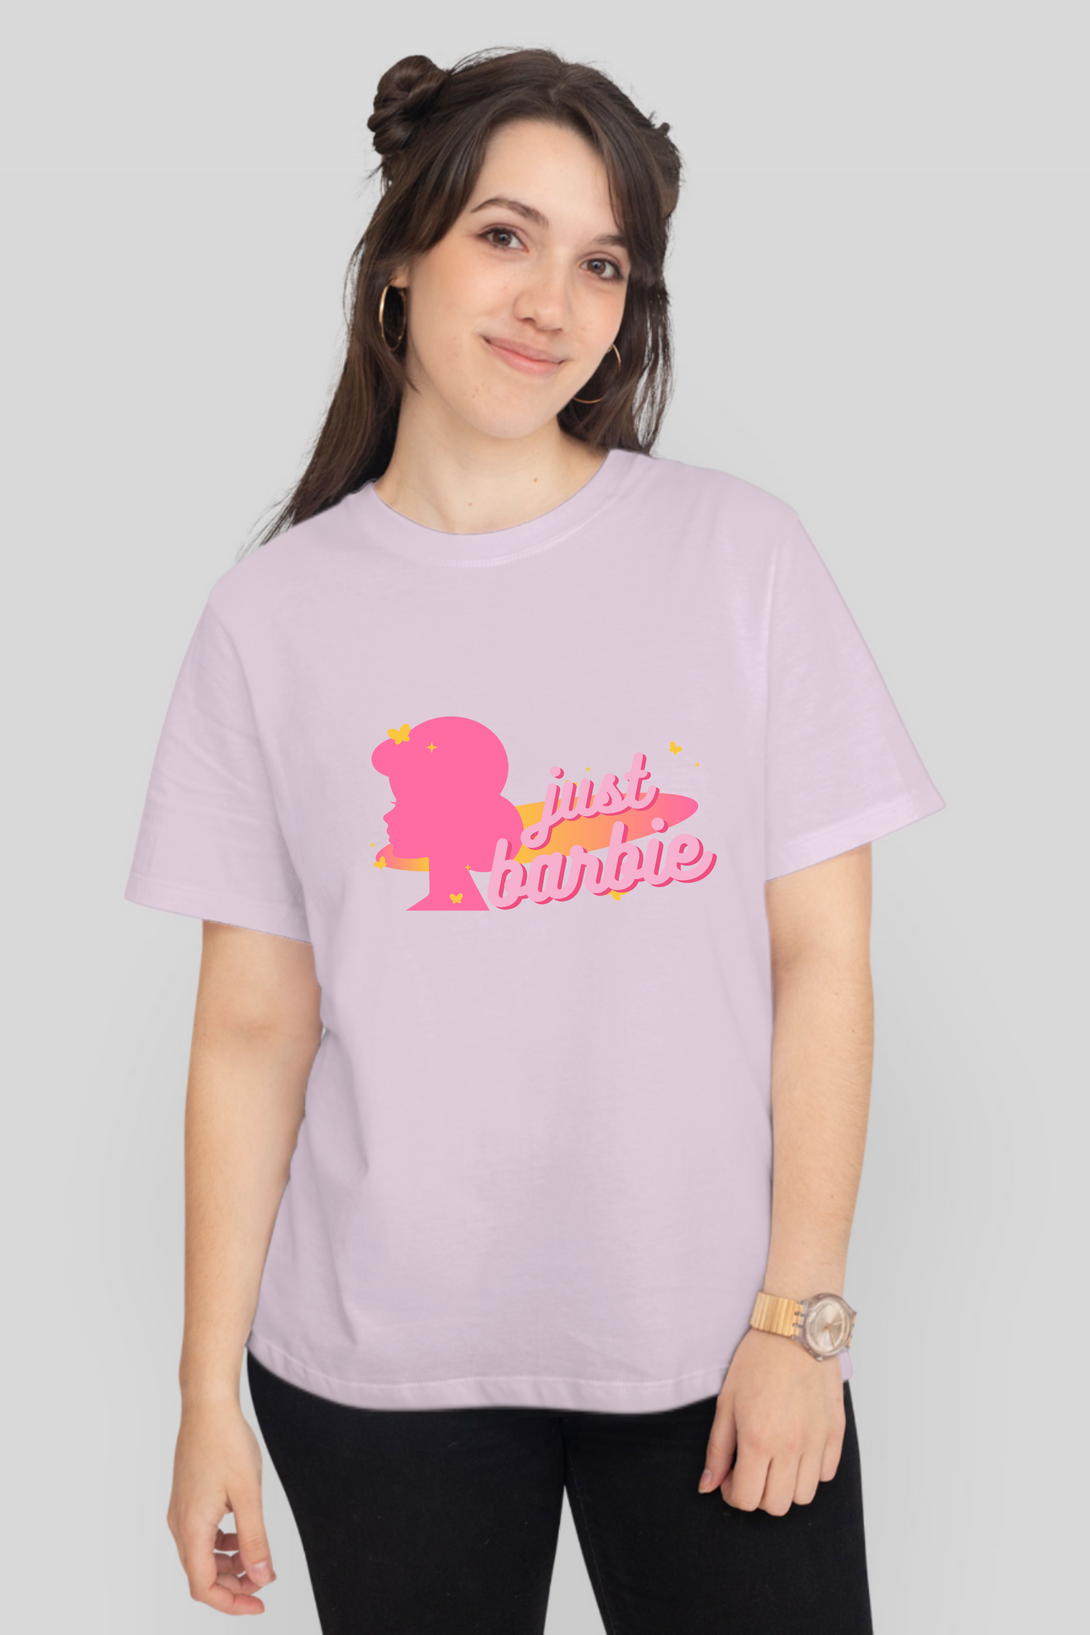 Just Barbie Printed T-Shirt For Women - WowWaves - 5